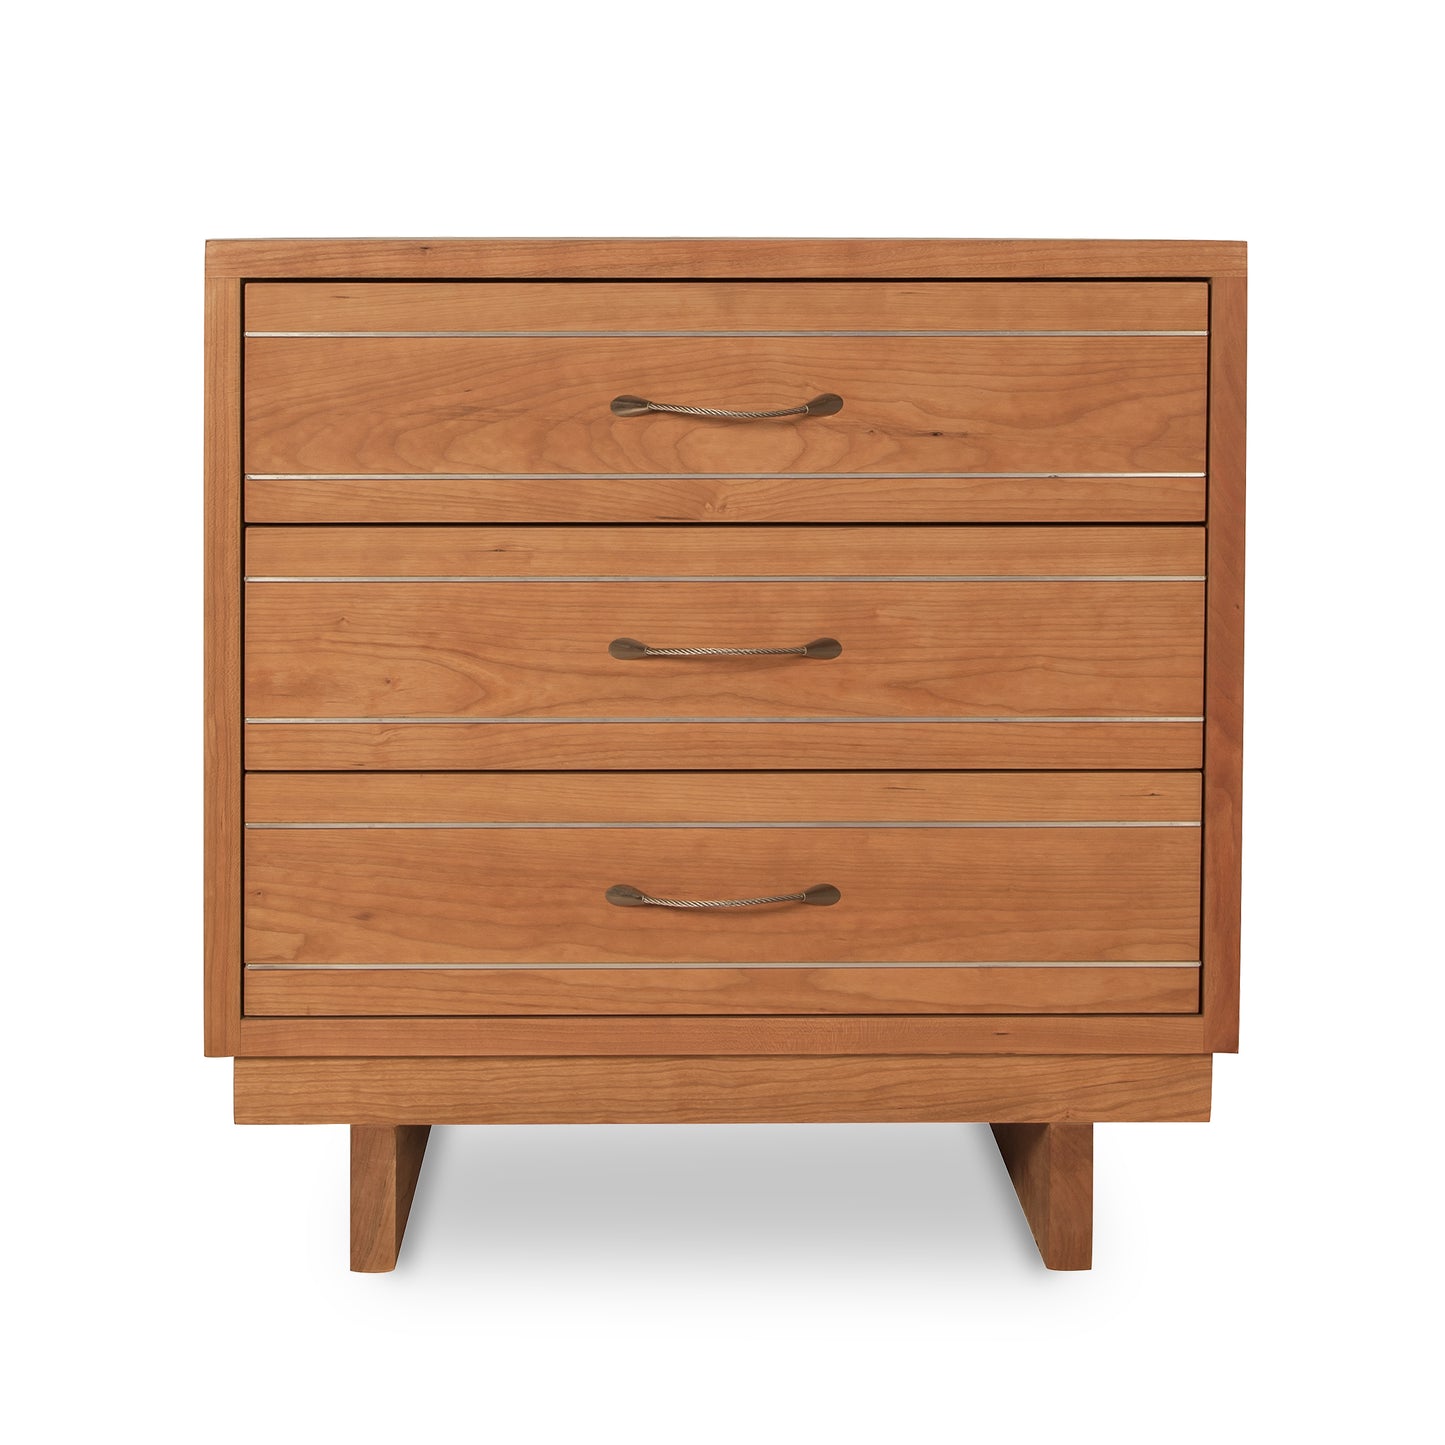 A solid wood, three-drawer Contemporary Cable 3-Drawer Chest with horizontal handles on a white background, handcrafted by Vermont Furniture Designs.